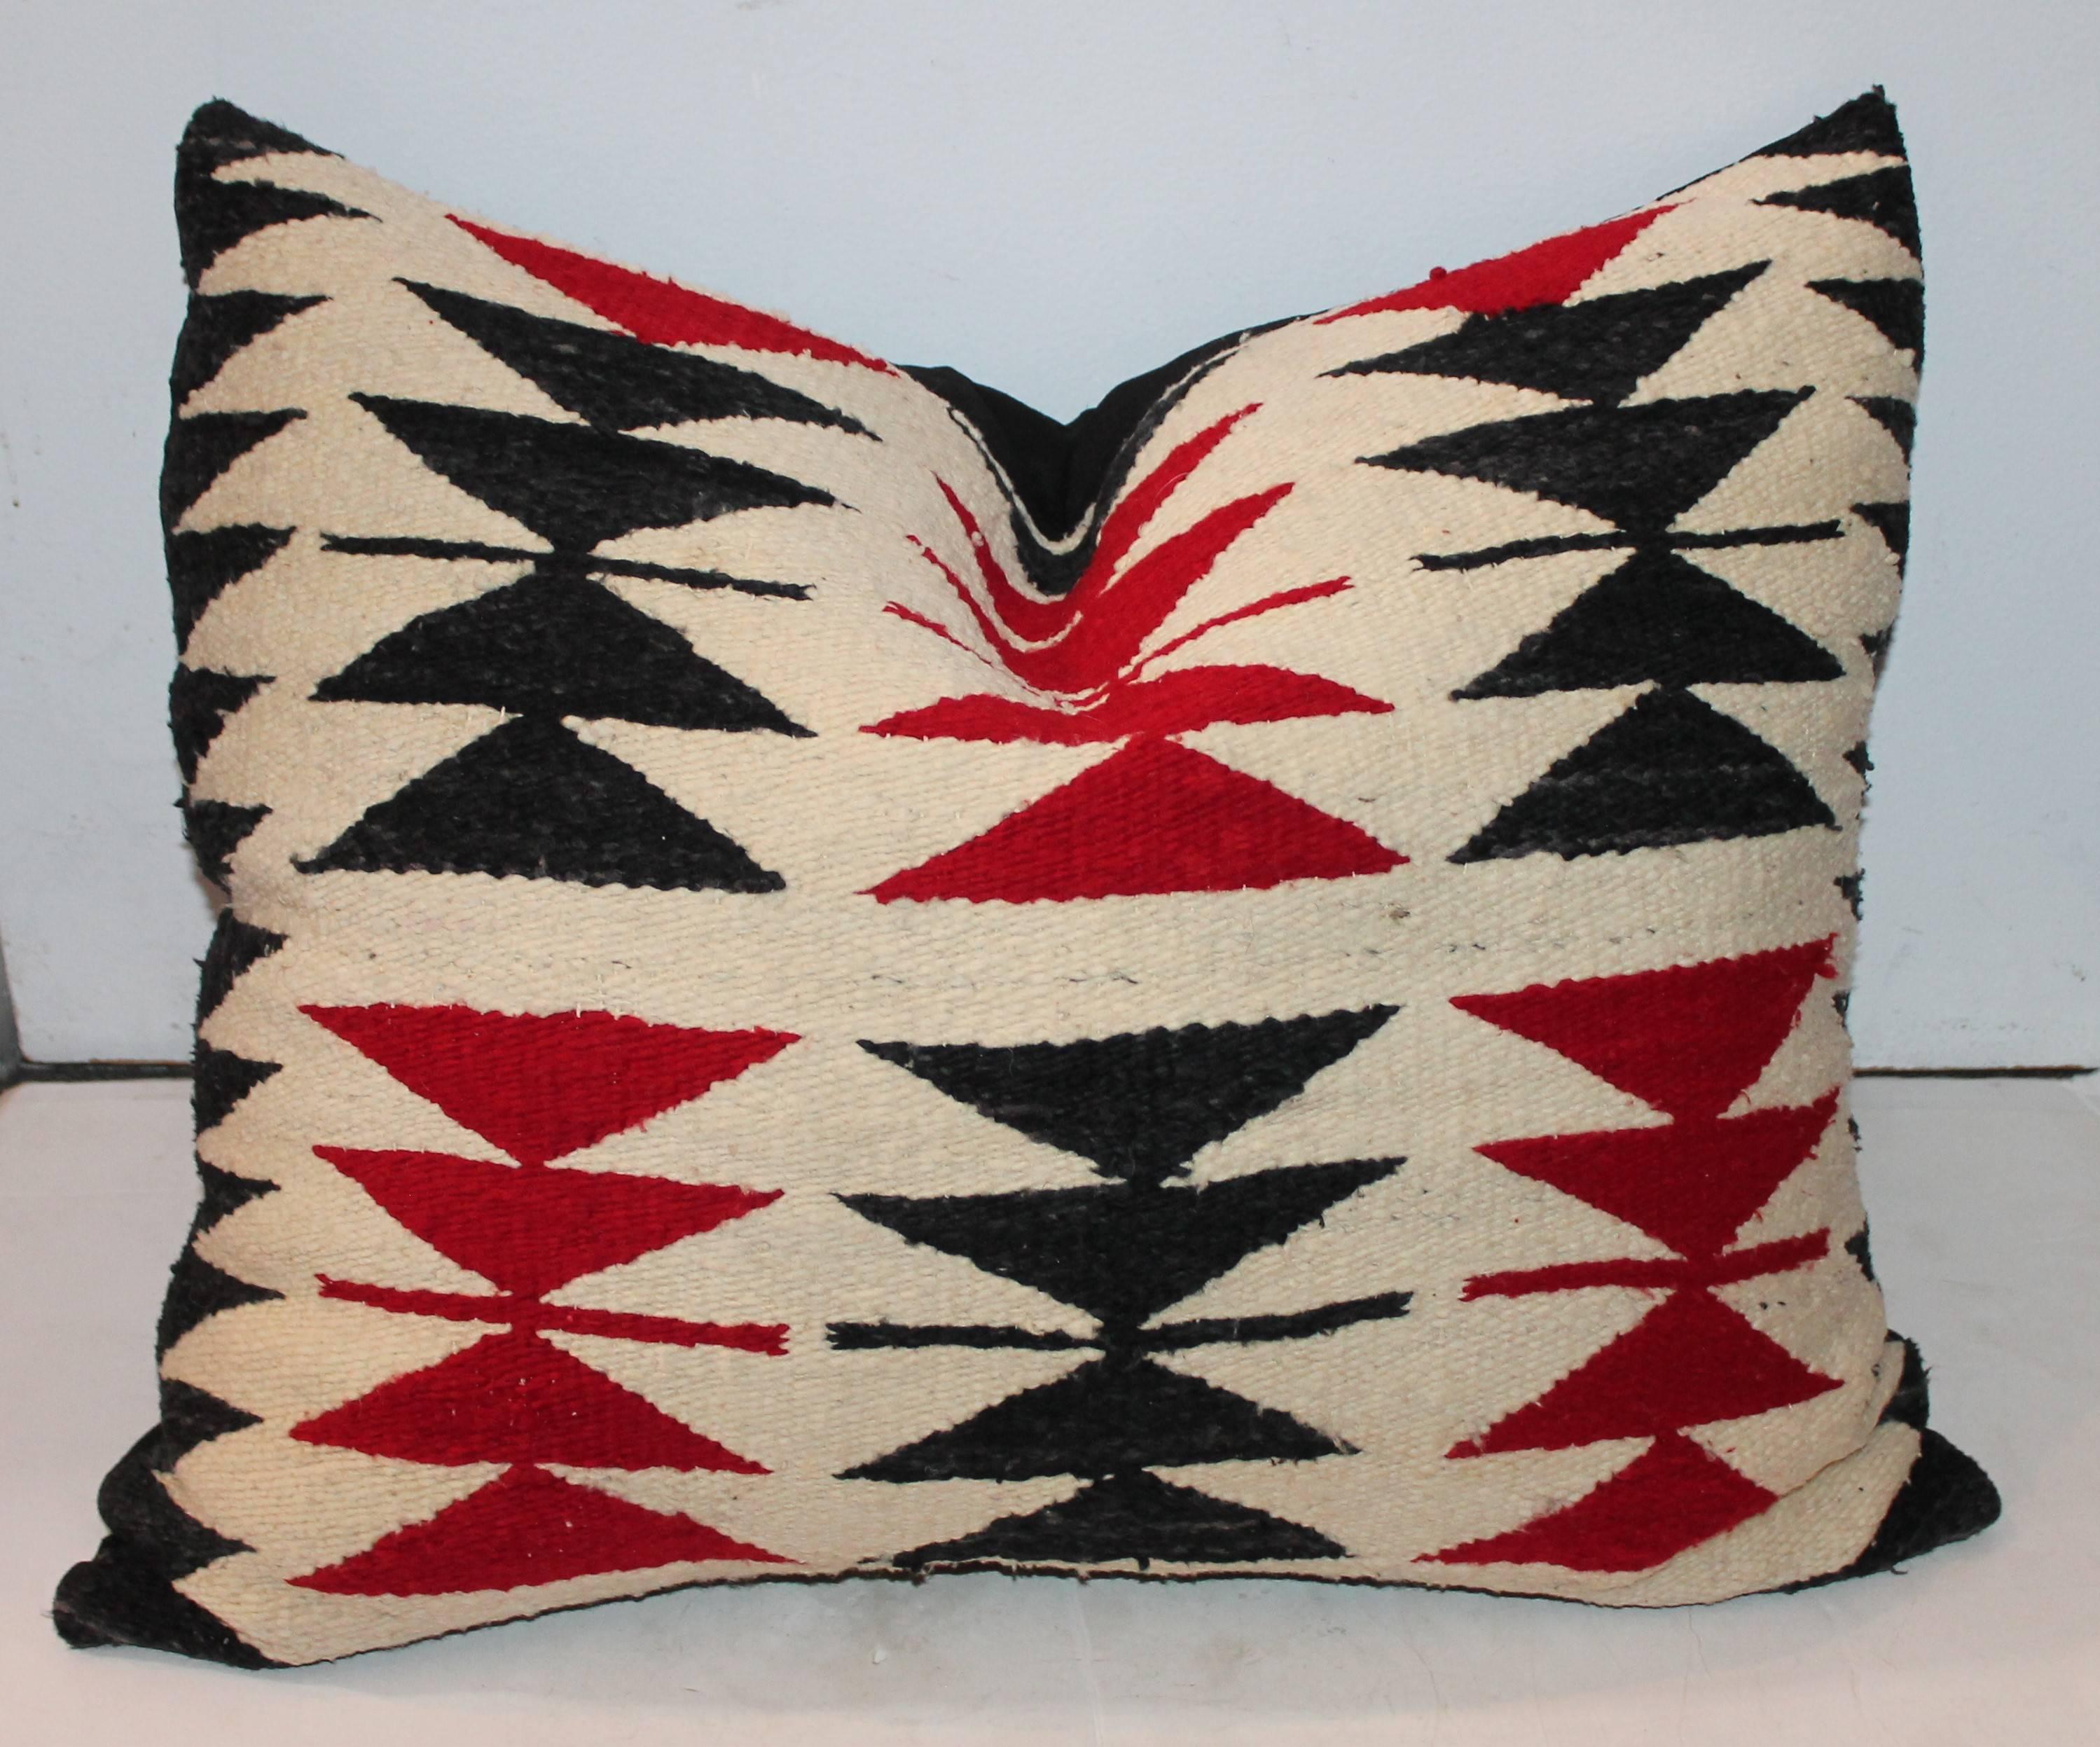 This amazing Navajo flying geese patter pillows is in amazing condition. Black and red are the most sought out colors when it comes to collecting Navajo. This pillow has a zipper enclosure with a down and feather insert. This item has been